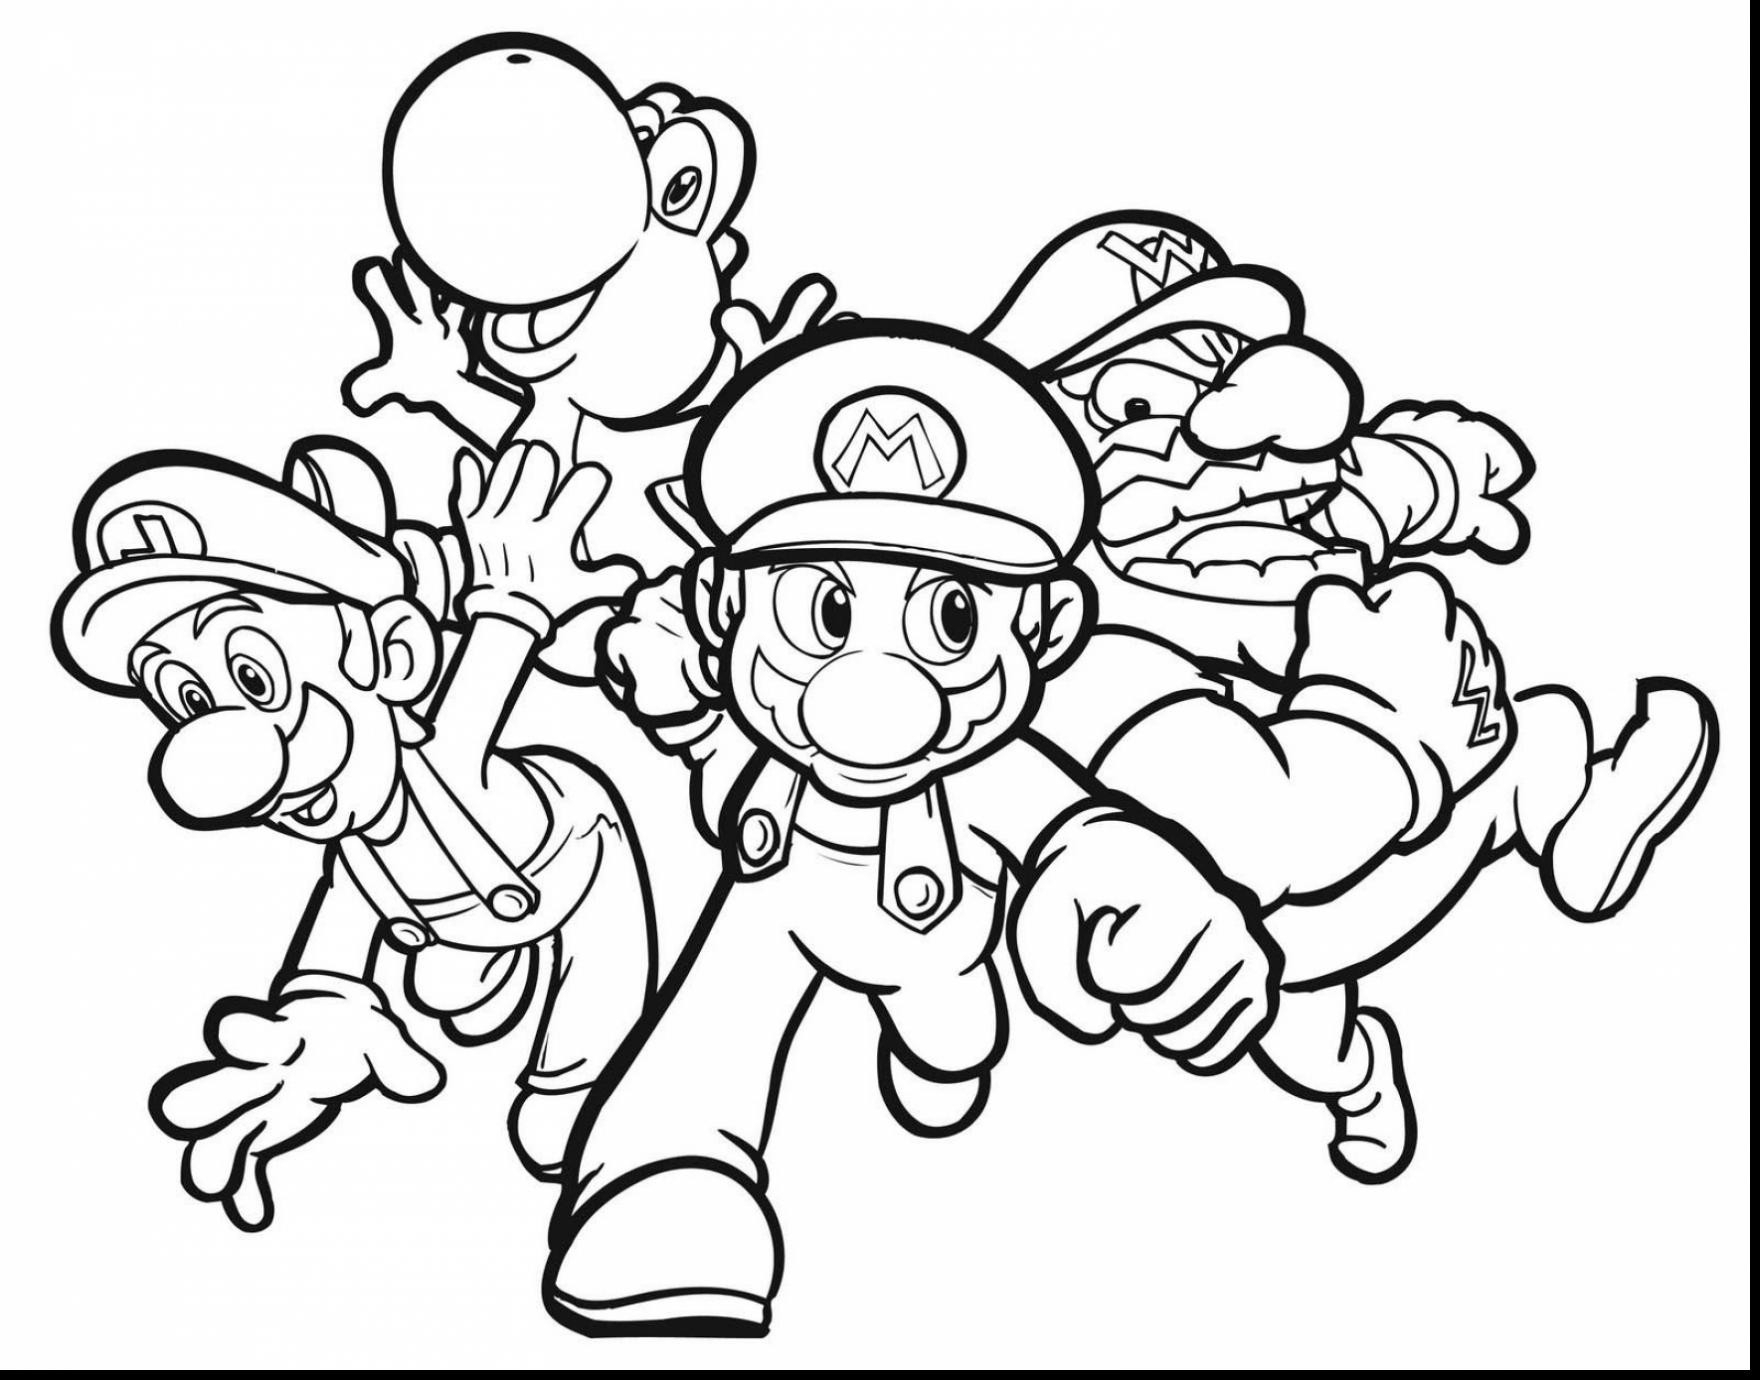 Plants Vs Zombie Coloring Pages Coloring Pages Splendi Plants Vs Zombies Coloring Pages Mario